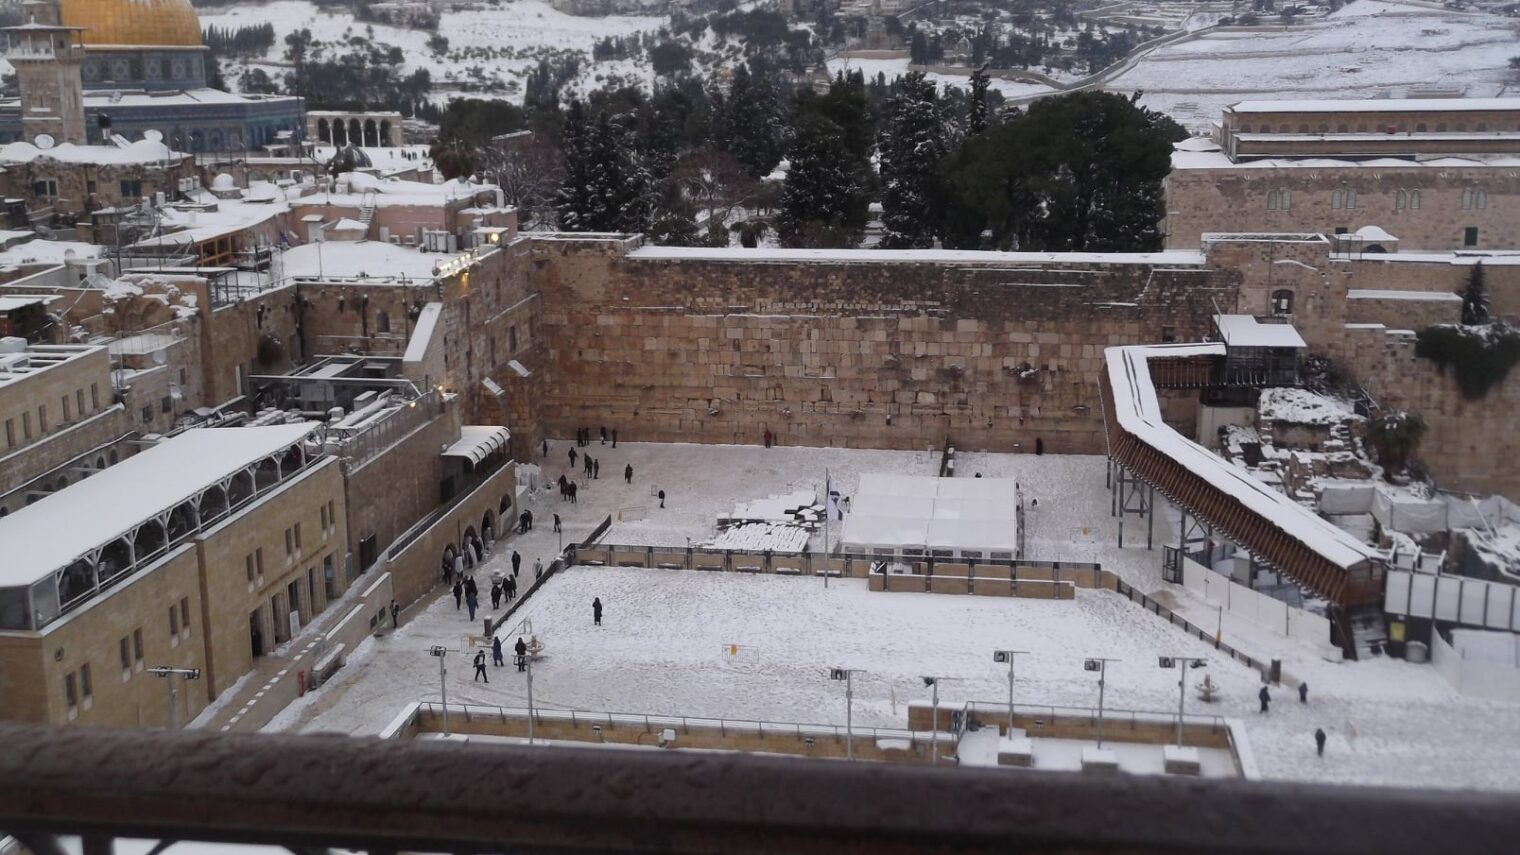 Snow falls on the Western Wall and Dome of the Rock. Photo by Chaya Weisberg/Heritage House